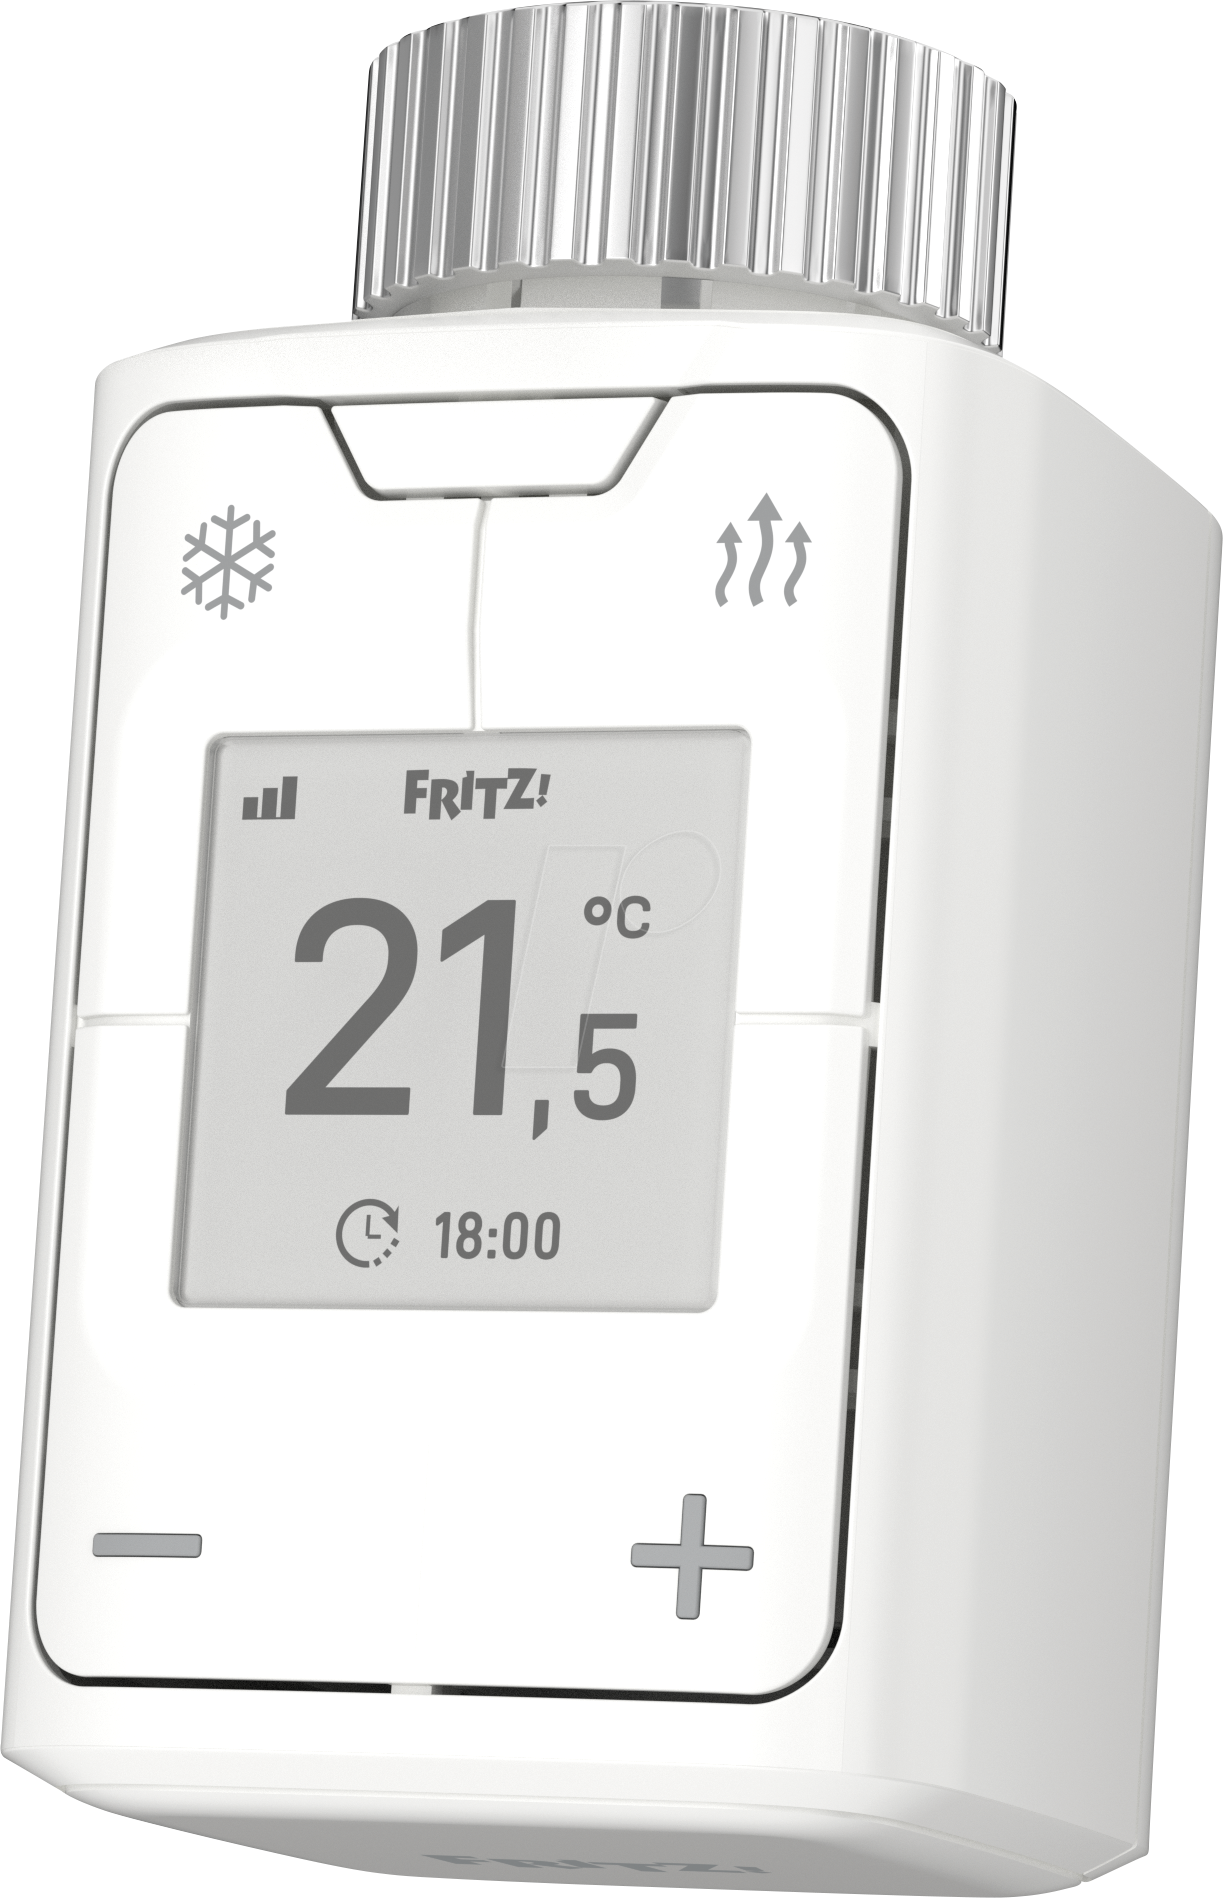 Adding Fritz!DECT 302 Thermostat and Fritz!Box 7590 AX to supported  devices? · Issue #29643 · home-assistant/home-assistant.io · GitHub